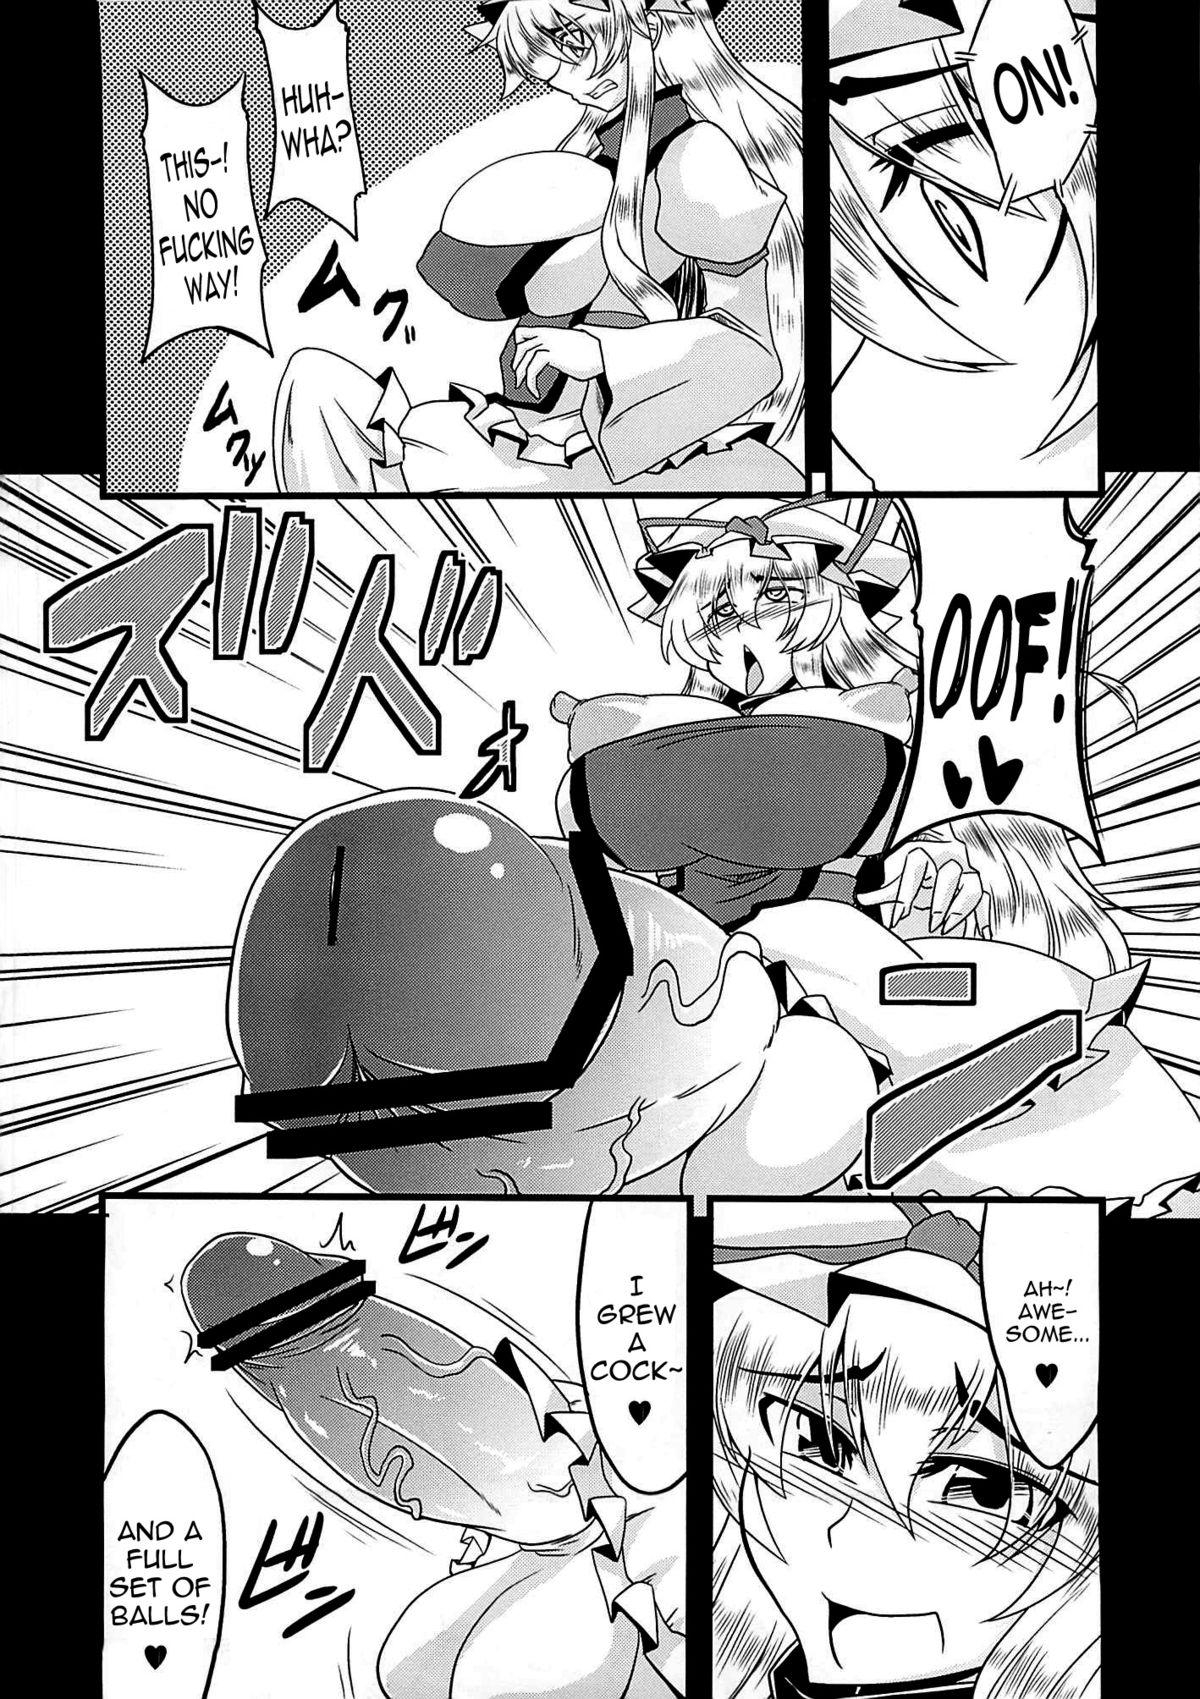 Hardon Illusionary Cock Story - Touhou project Dirty - Page 5